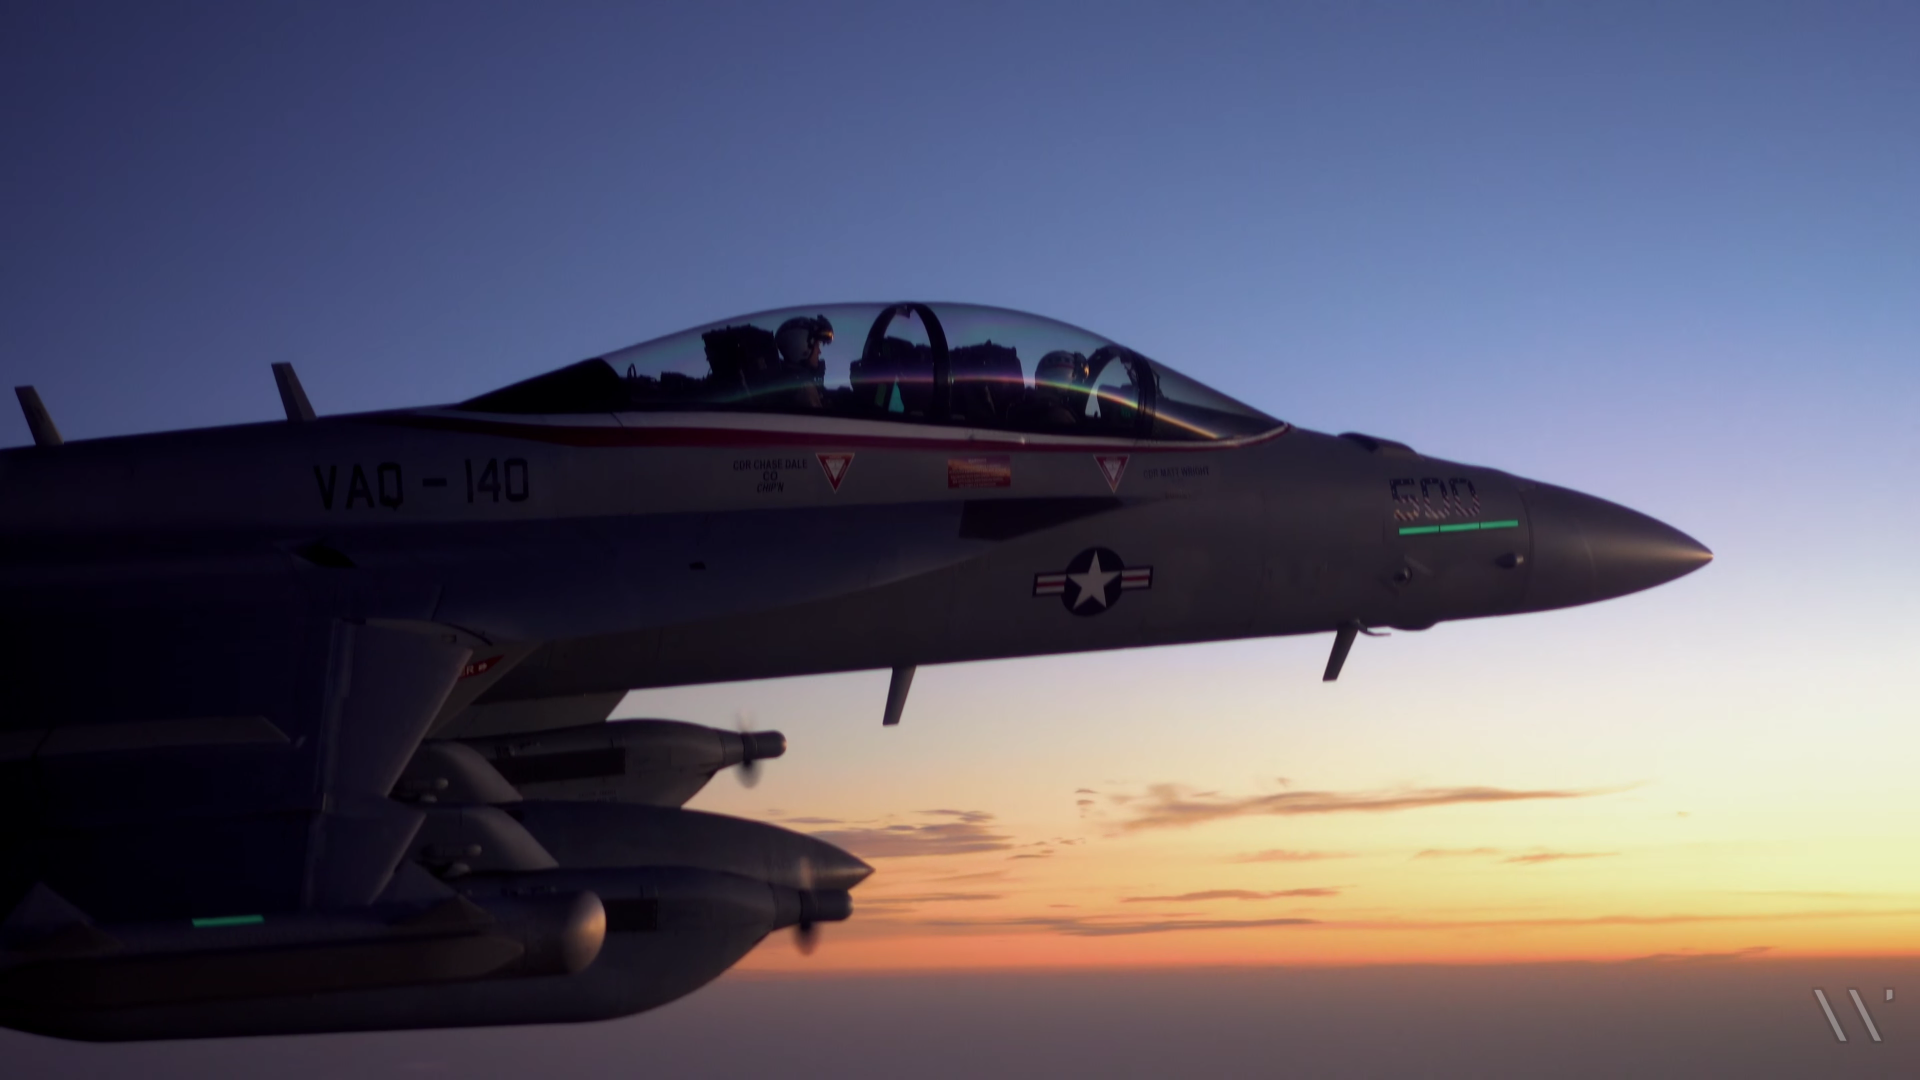 General 1920x1080 Boeing EA-18G Growler United States Navy USN VAQ-140 504 Patriots dusk 7TH Carrier Air Wing jet fighter Multirole fighter military military aircraft aircraft American aircraft screen shot